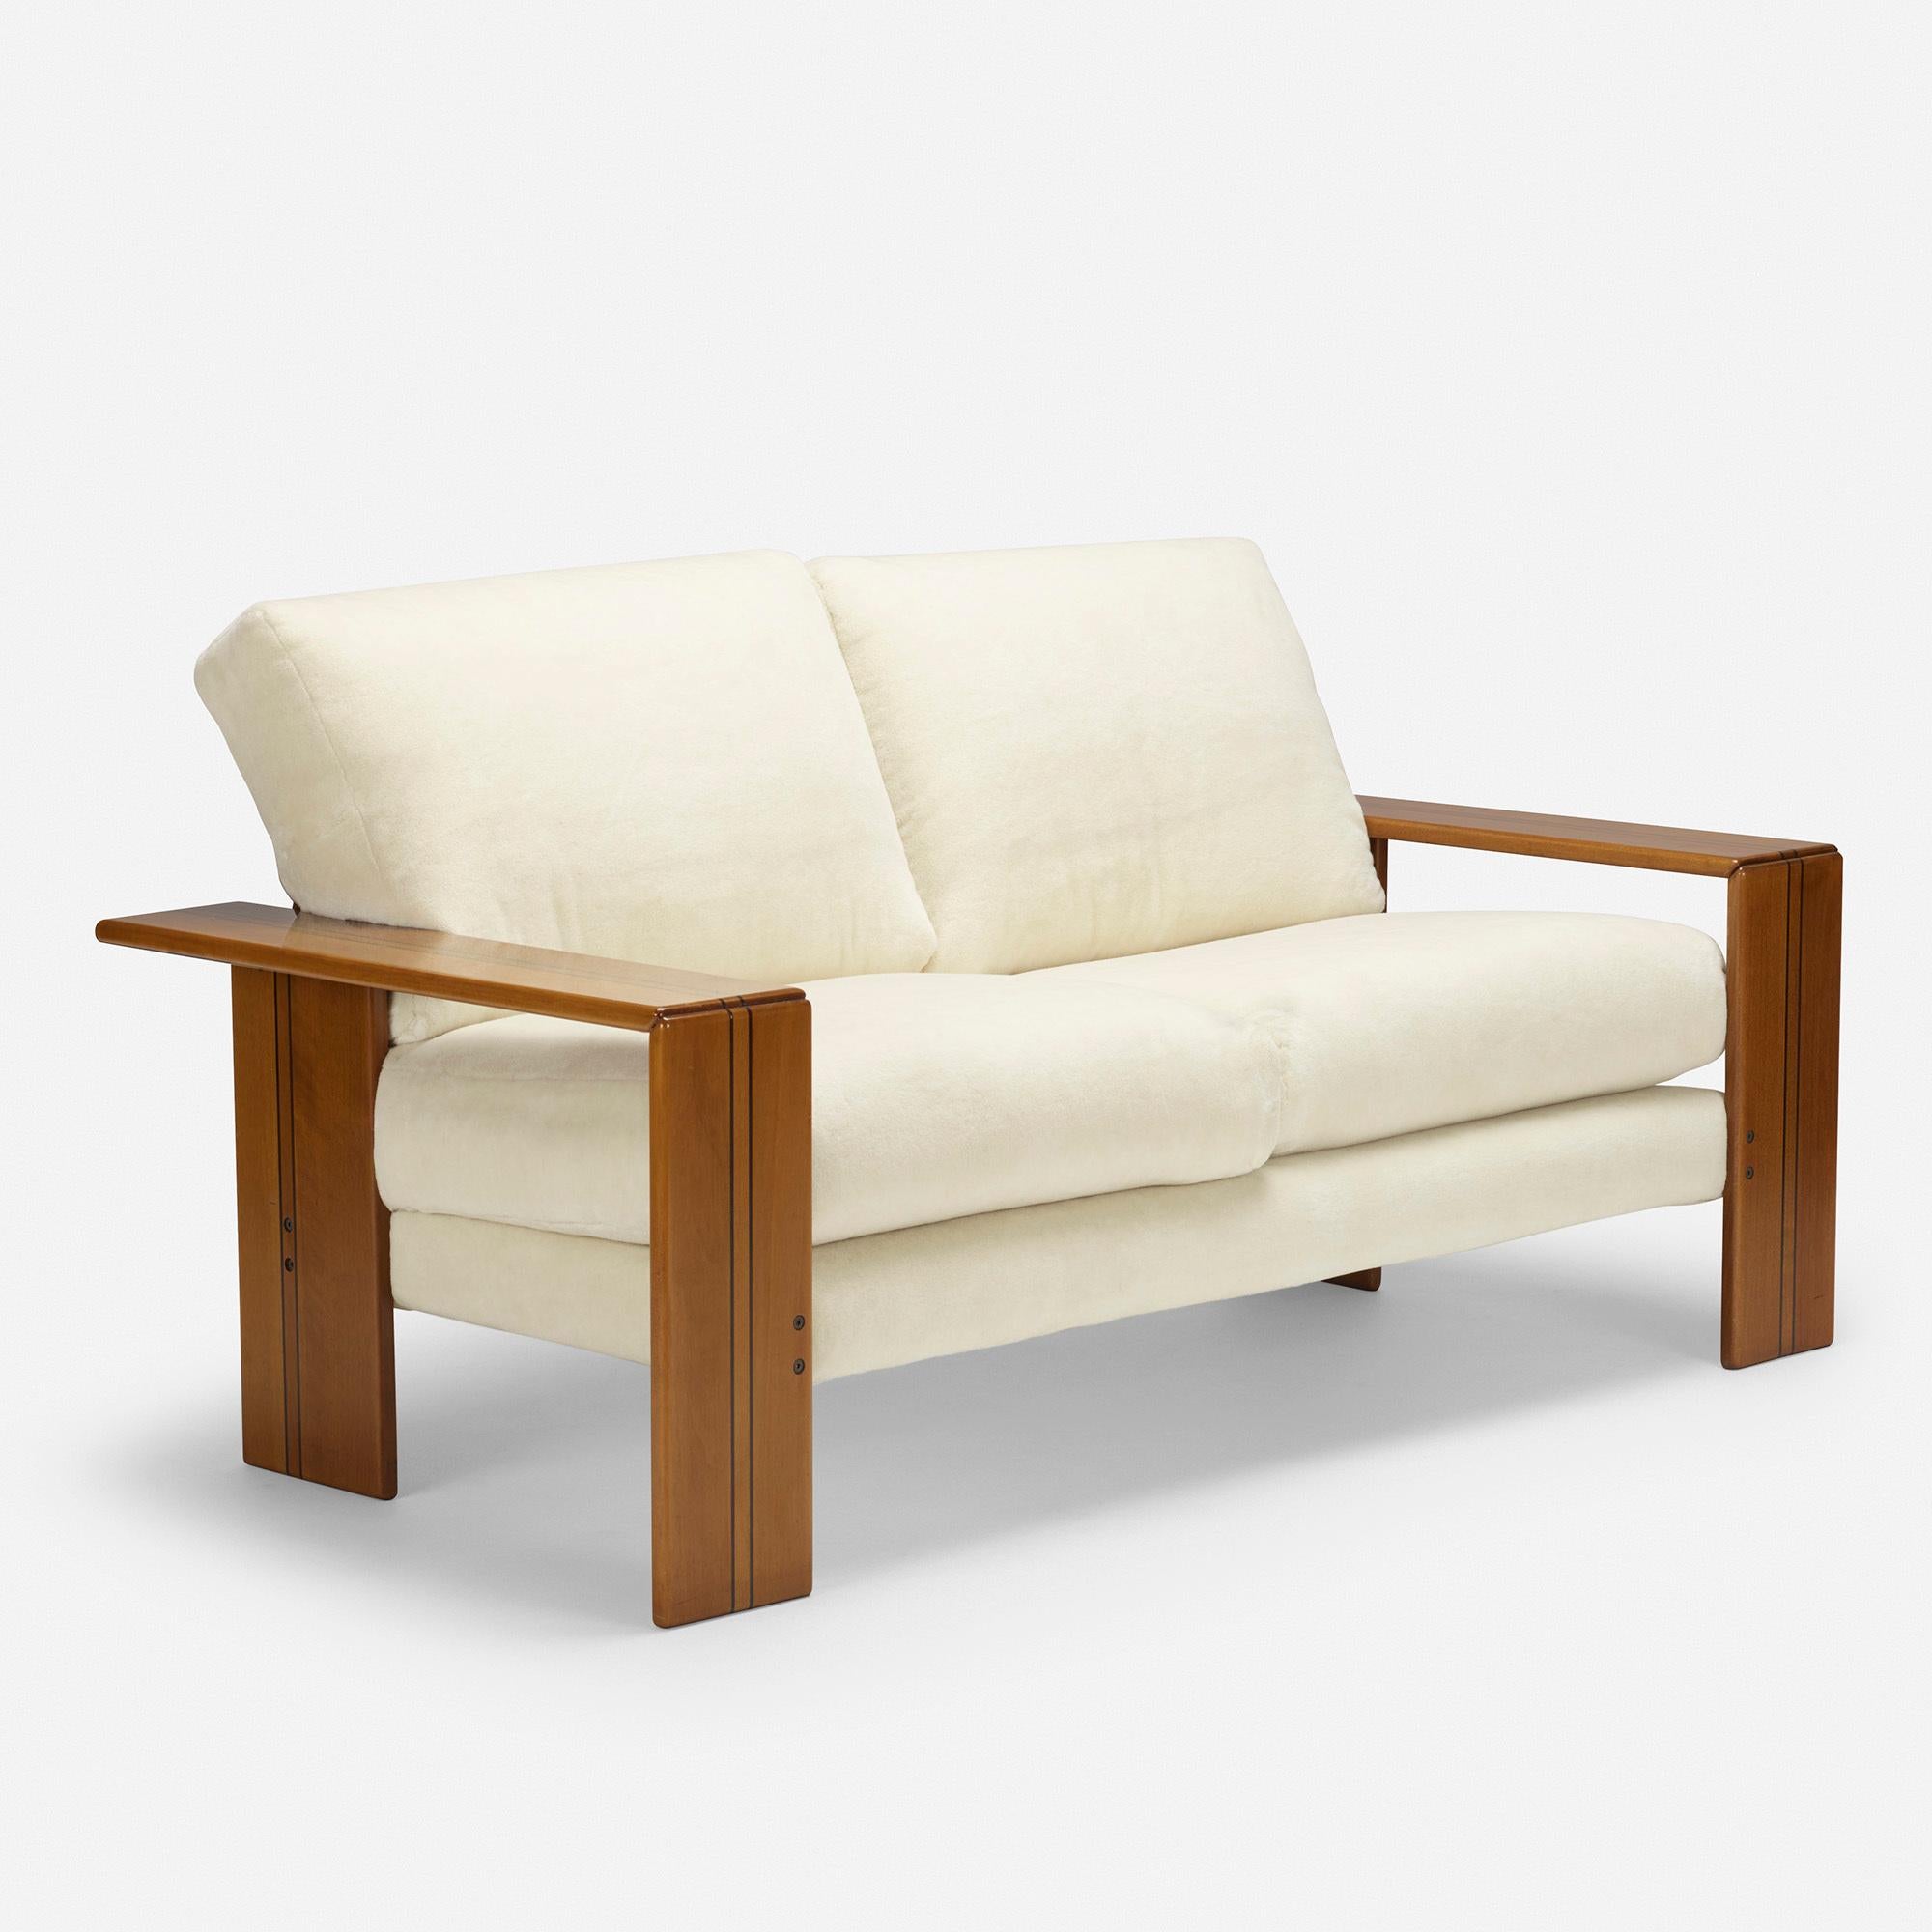 Afra and Tobia Scarpa Artona settee by Maxalto

Made by Maxalto, Italy, 1975

Additional information:
Material: Walnut, mohair, ebony
Size: 66 W × 33.5 D × 33 H inches

Condition: Upholstery was updated as needed. Seat cushions each show a